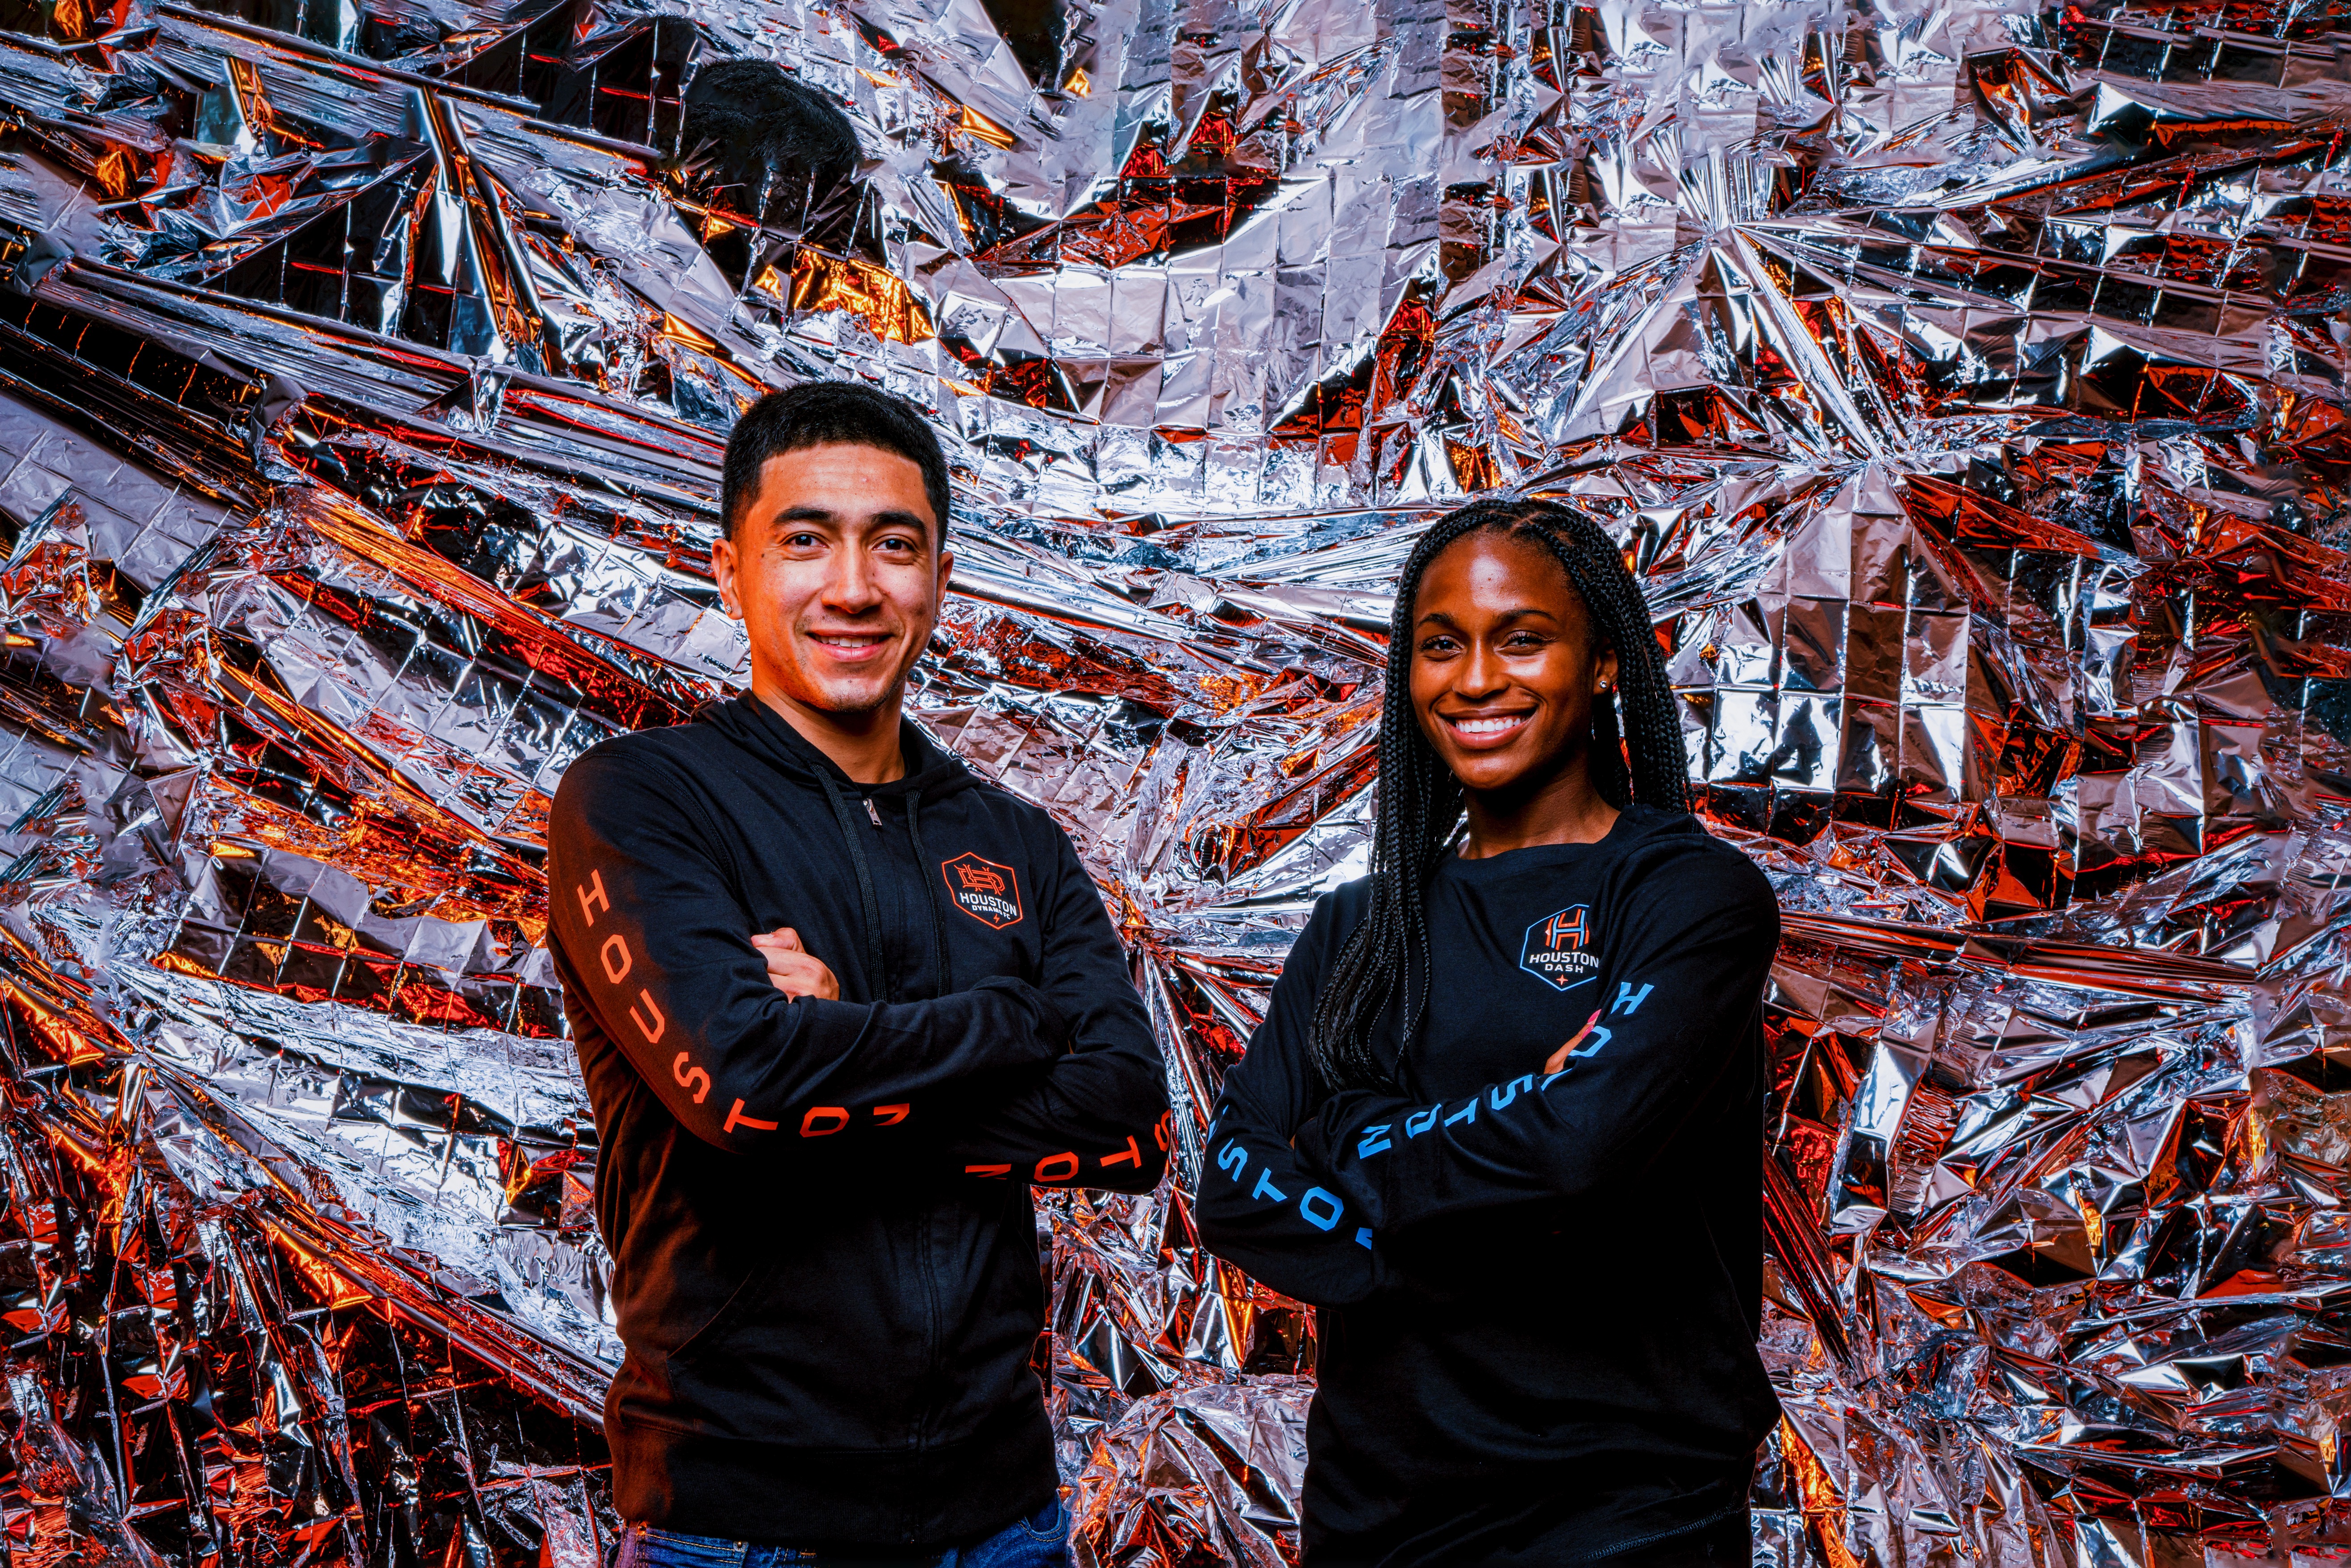 Houston Dynamo Football Club midfielder Memo Rodriguez and Houston Dash forward Nichelle Prince pose at BBVA Stadium. Both players are wearing the new Houston Dynamo FC and Dash merchandise available to fans at HoustonDynamoFC.com